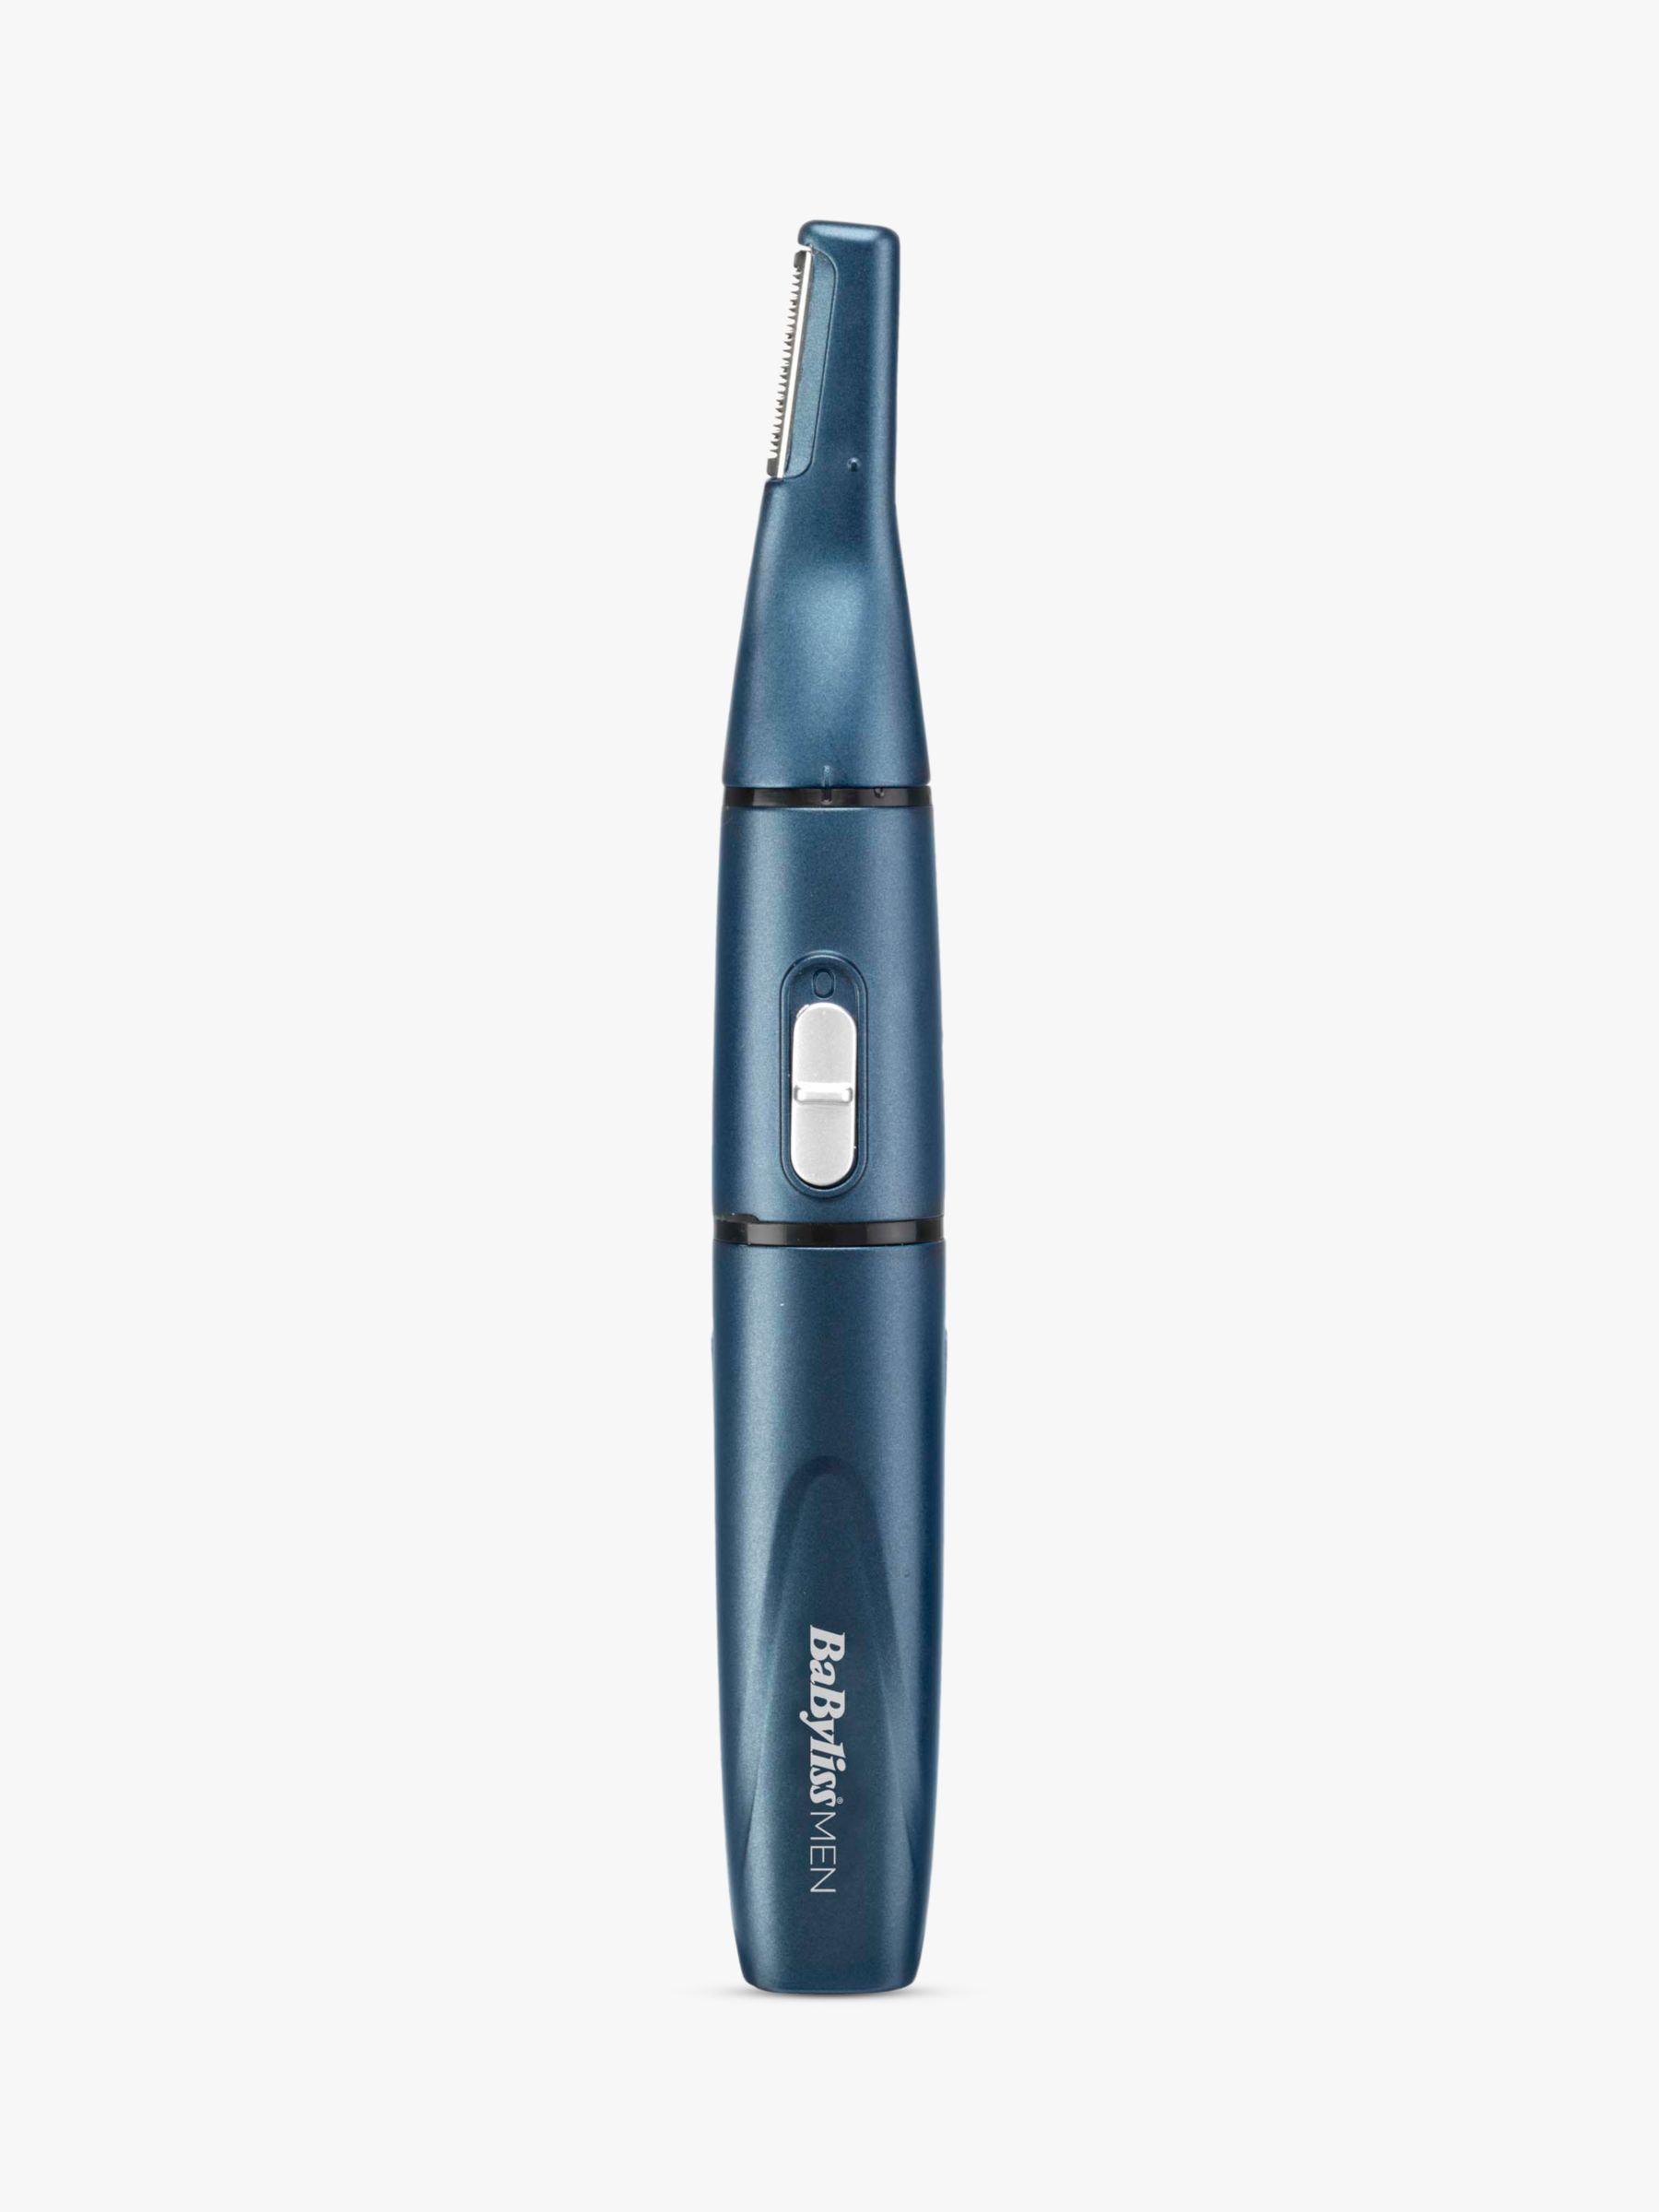 babyliss grooming kit